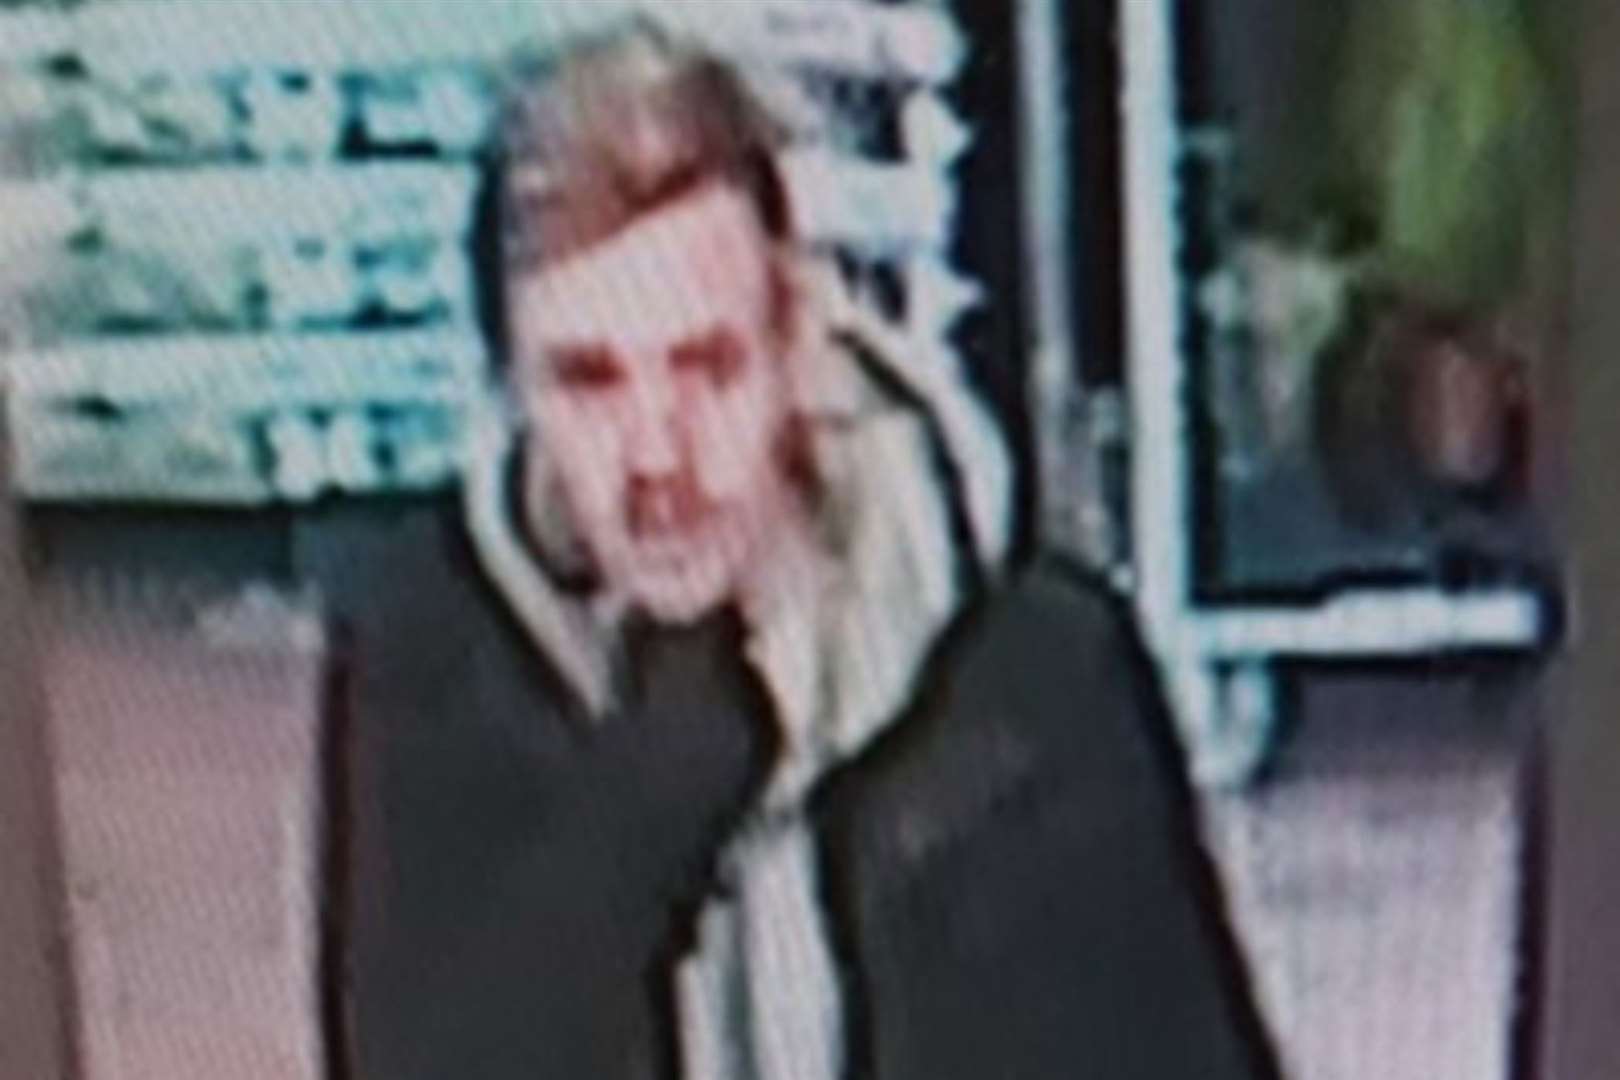 A CCTV image has been released as officers investigate seven shoplifting offences in Ashford. Picture: Kent Police